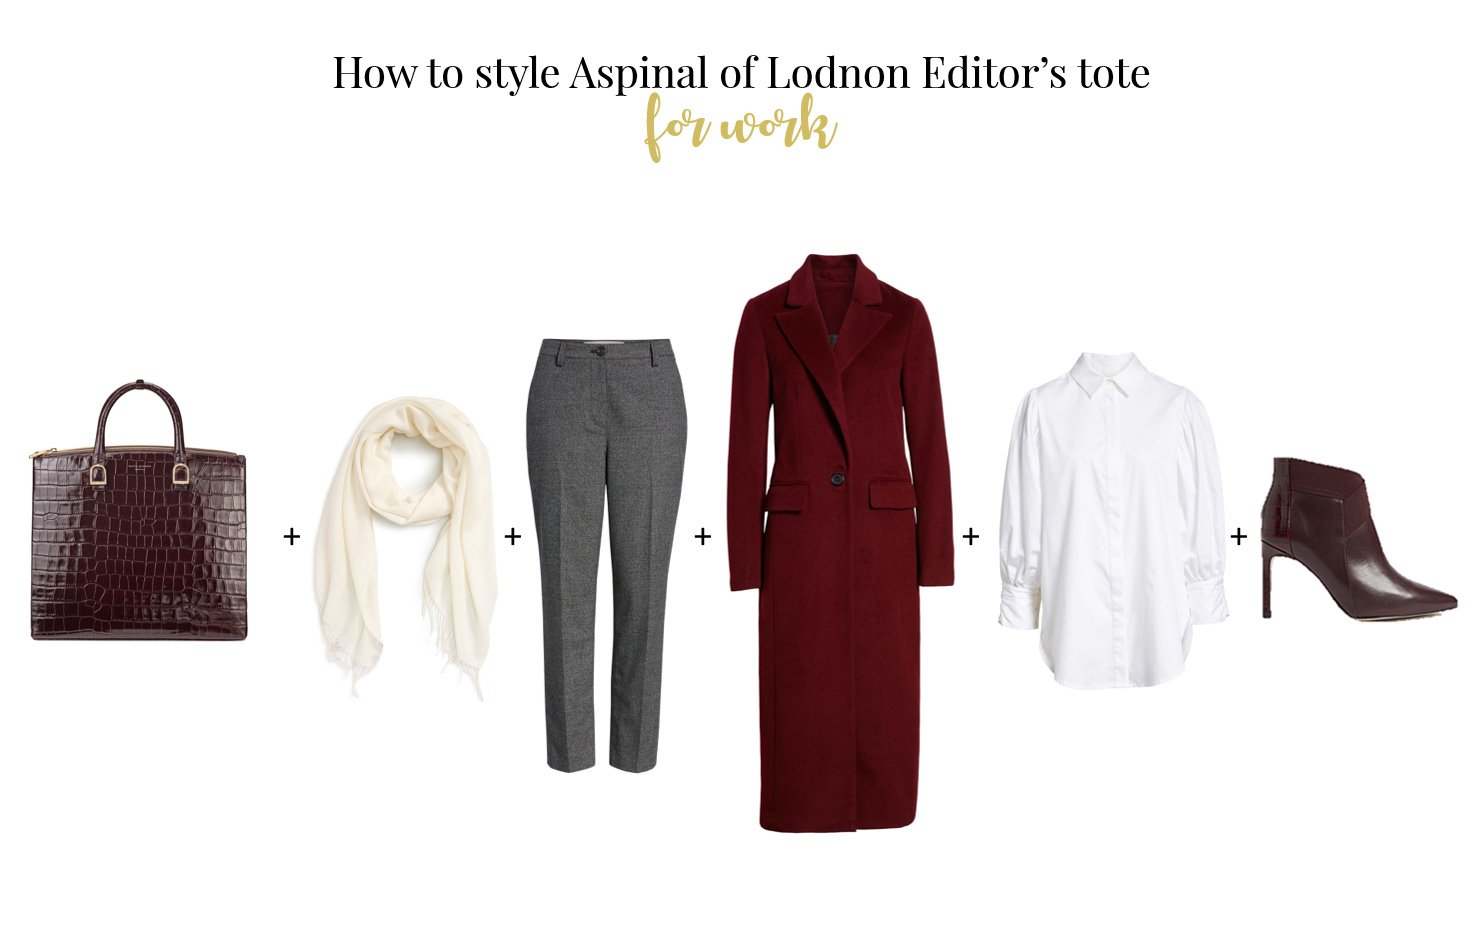 How to wear Aspinal of London Editor's tote bag for work